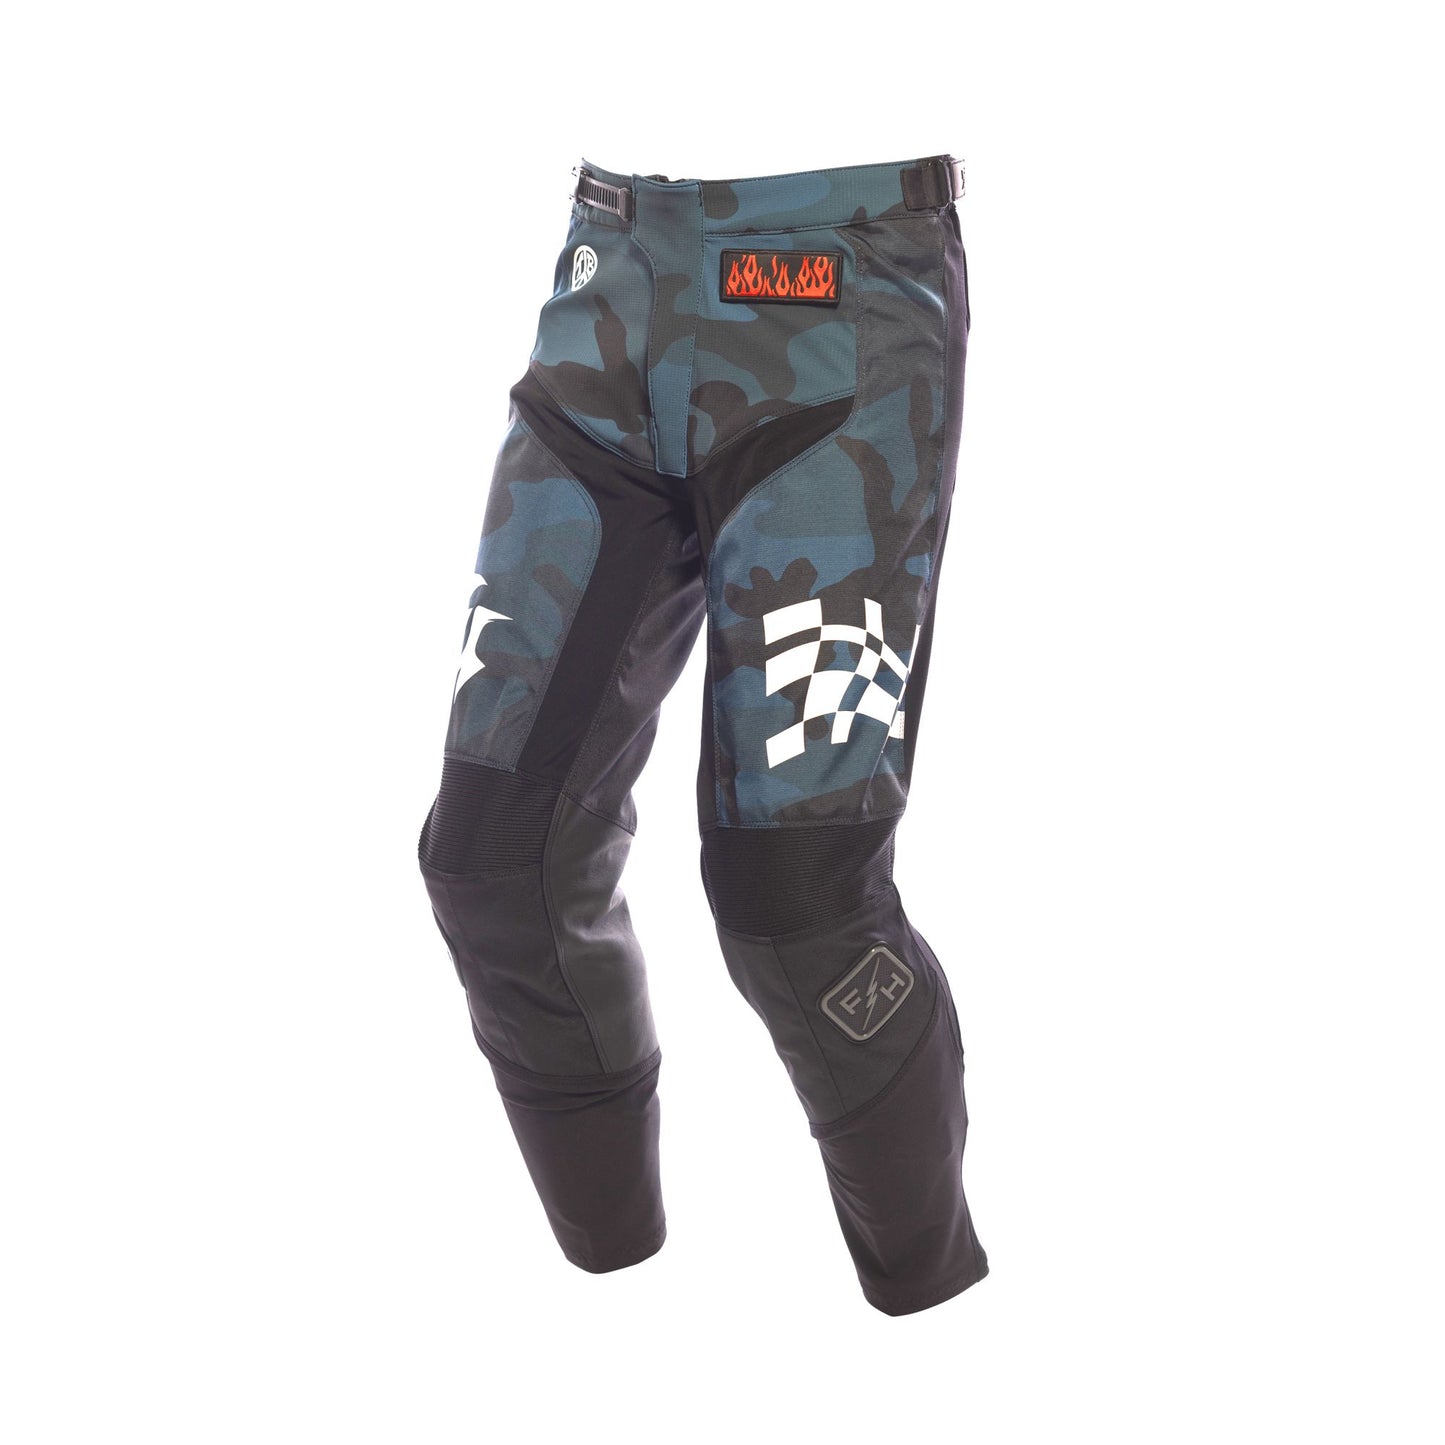 Fasthouse Youth Grindhouse Bereman Pant Blue Camo Y26 Bike Pants